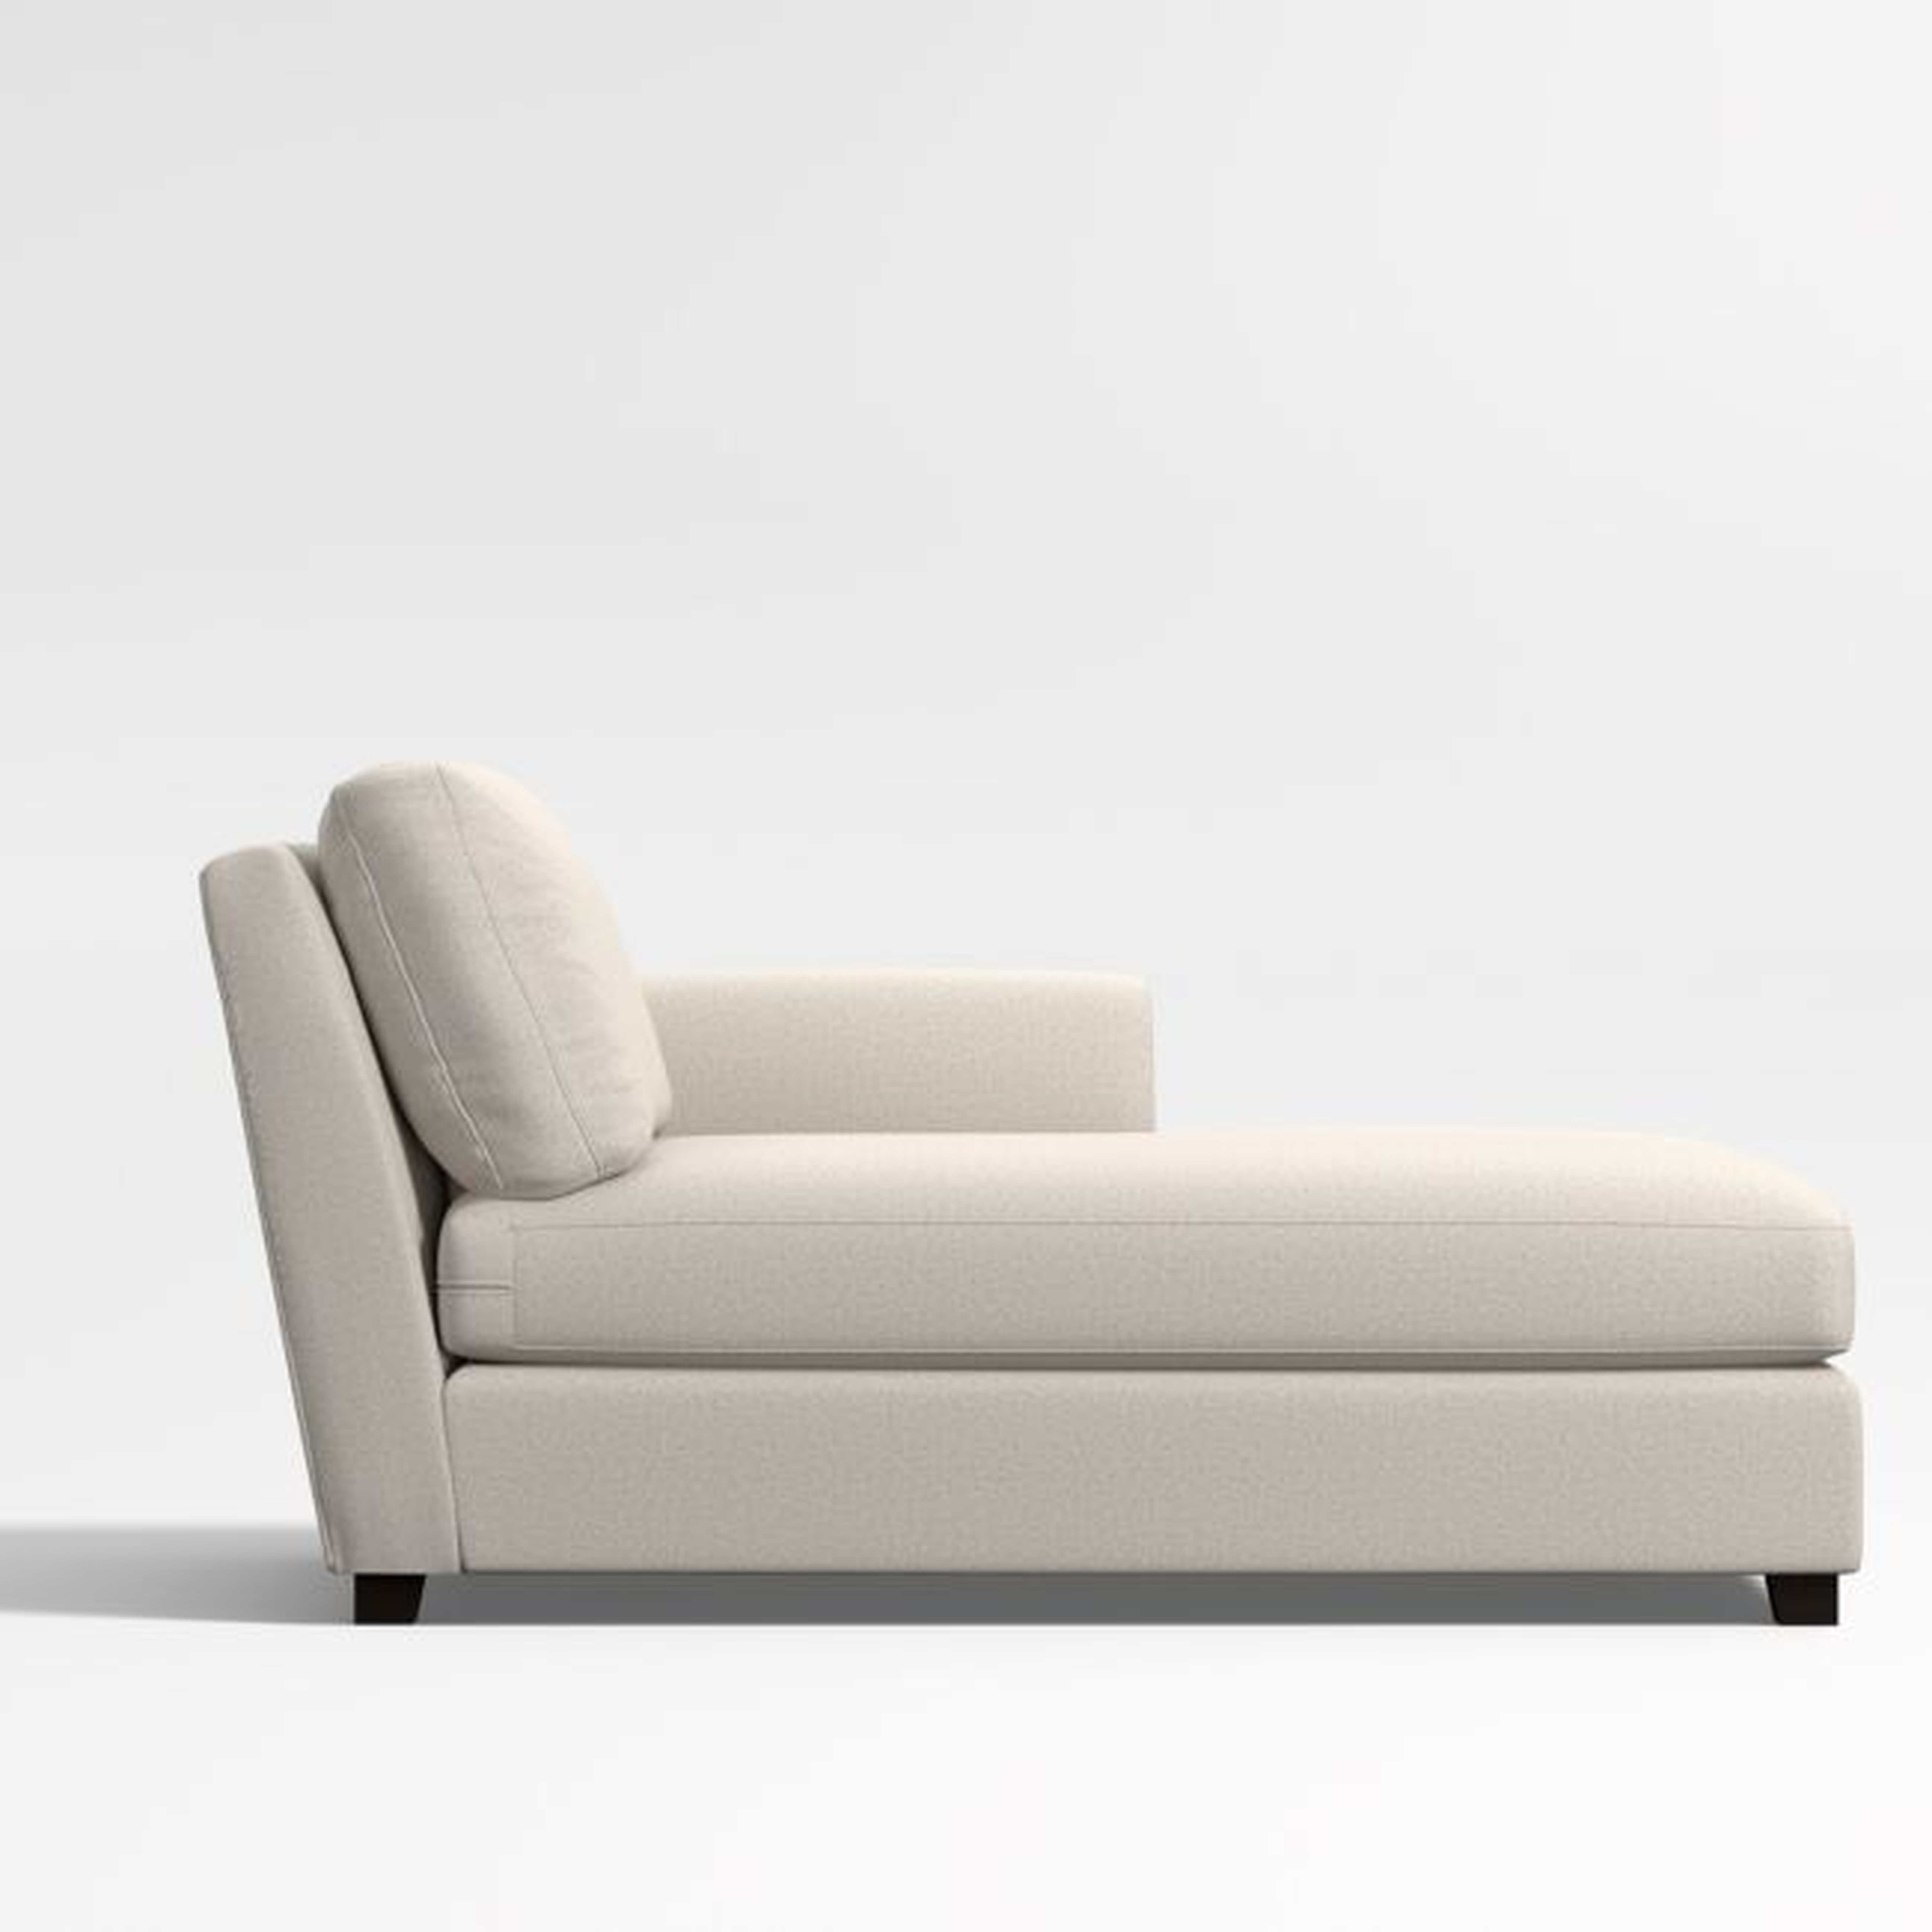 Benicia Right Roll-Arm Chaise - Crate and Barrel